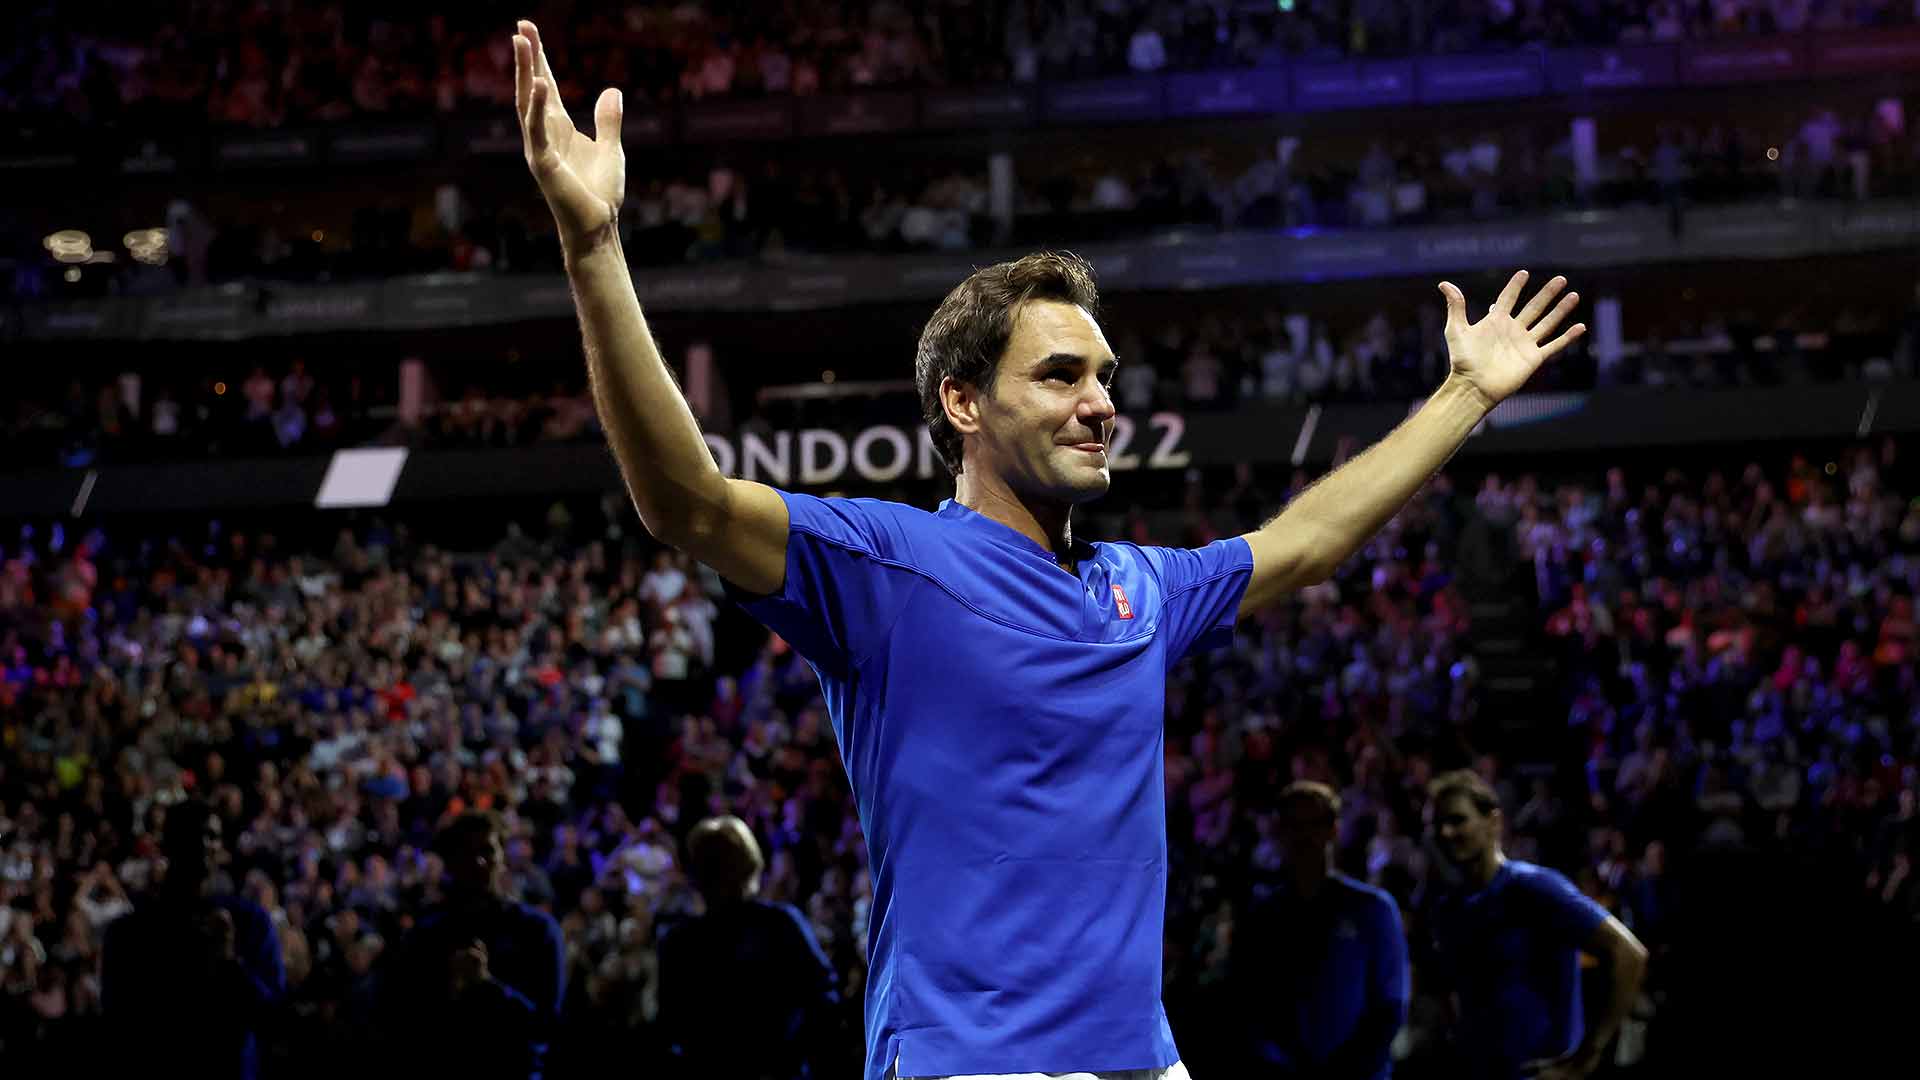 <a href='https://www.atptour.com/en/players/roger-federer/f324/overview'>Roger Federer</a> says his final farewell to fans at The O2.